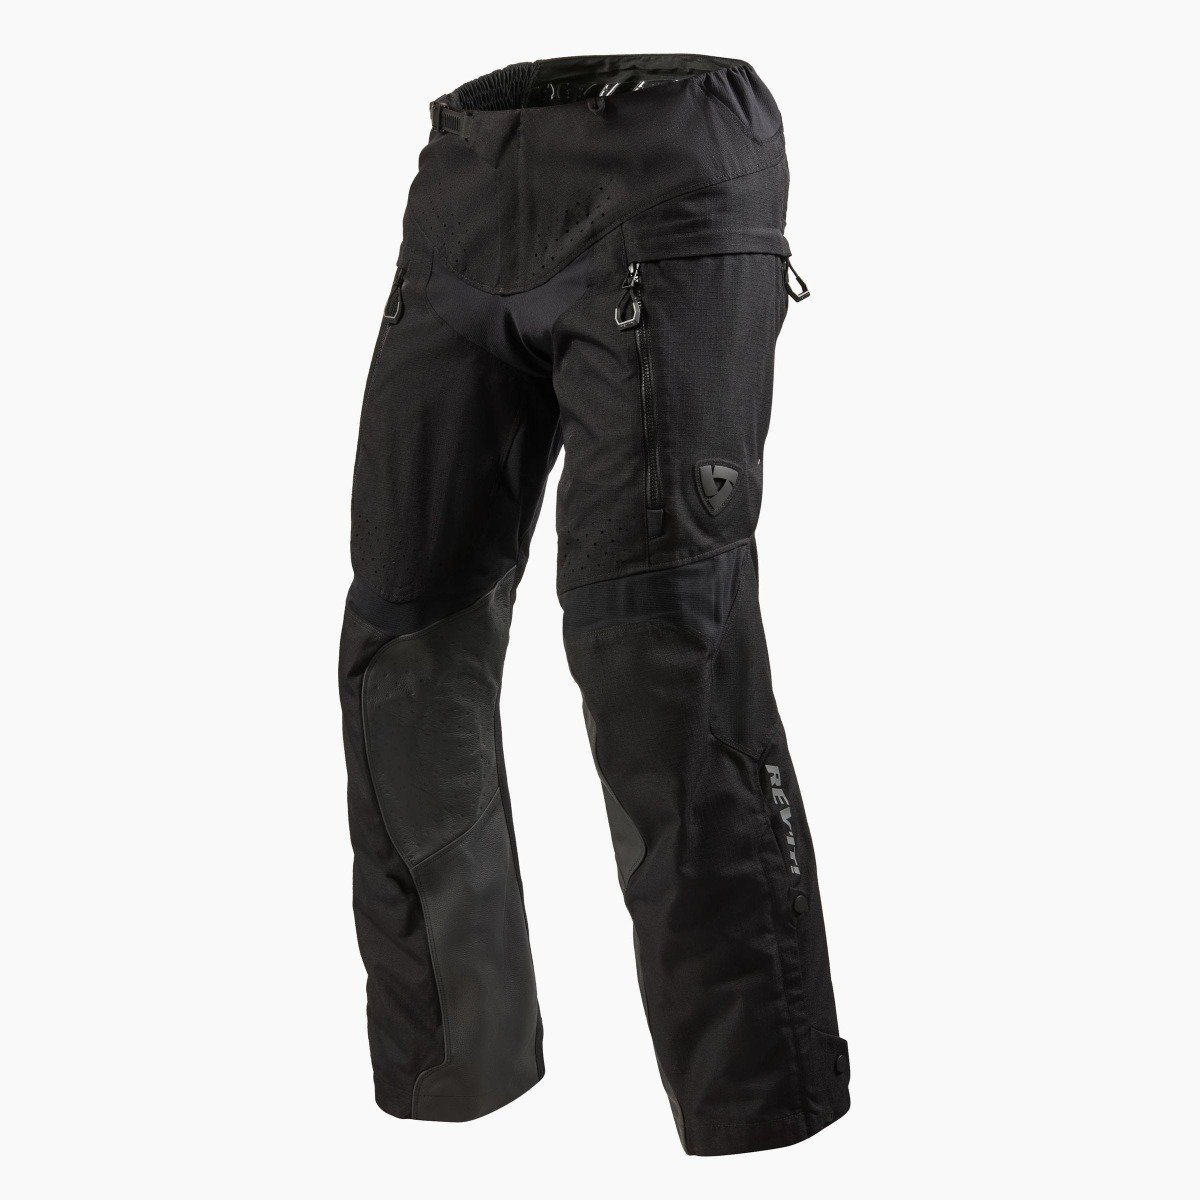 Image of REV'IT! Continent Short Black Motorcycle Pants Size 2XL ID 8700001297110